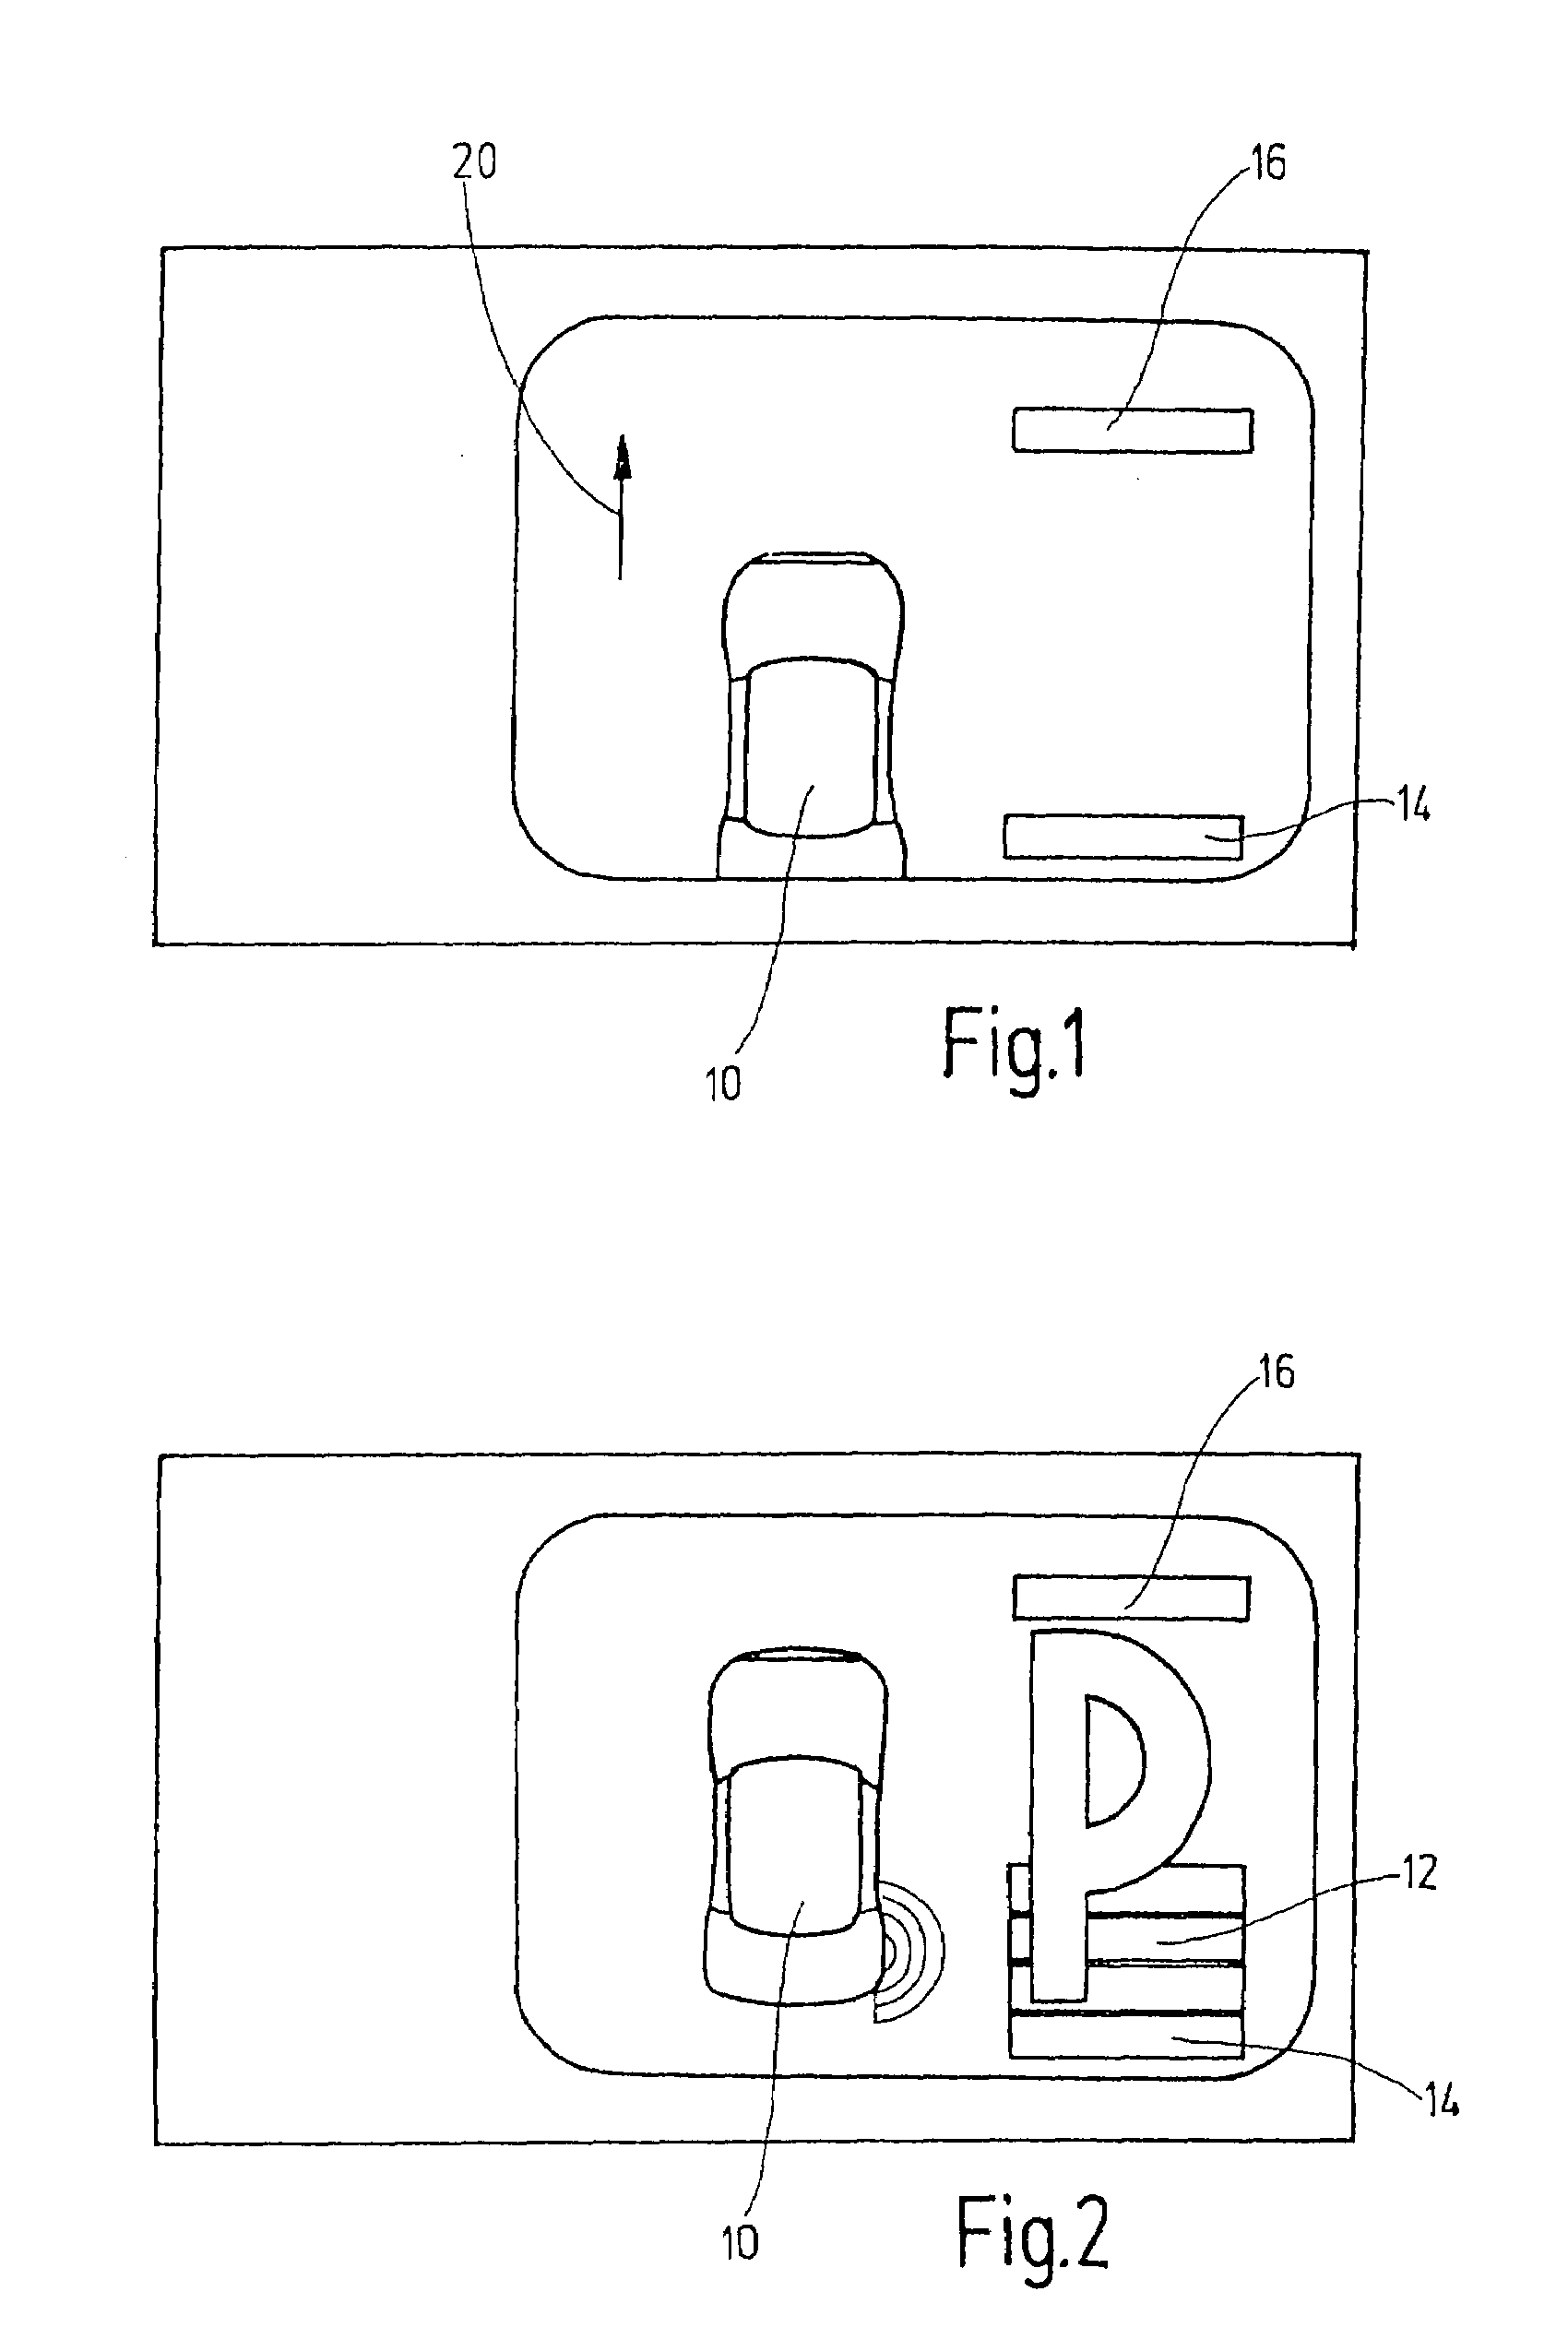 Method for providing information for parallel parking of a vehicle